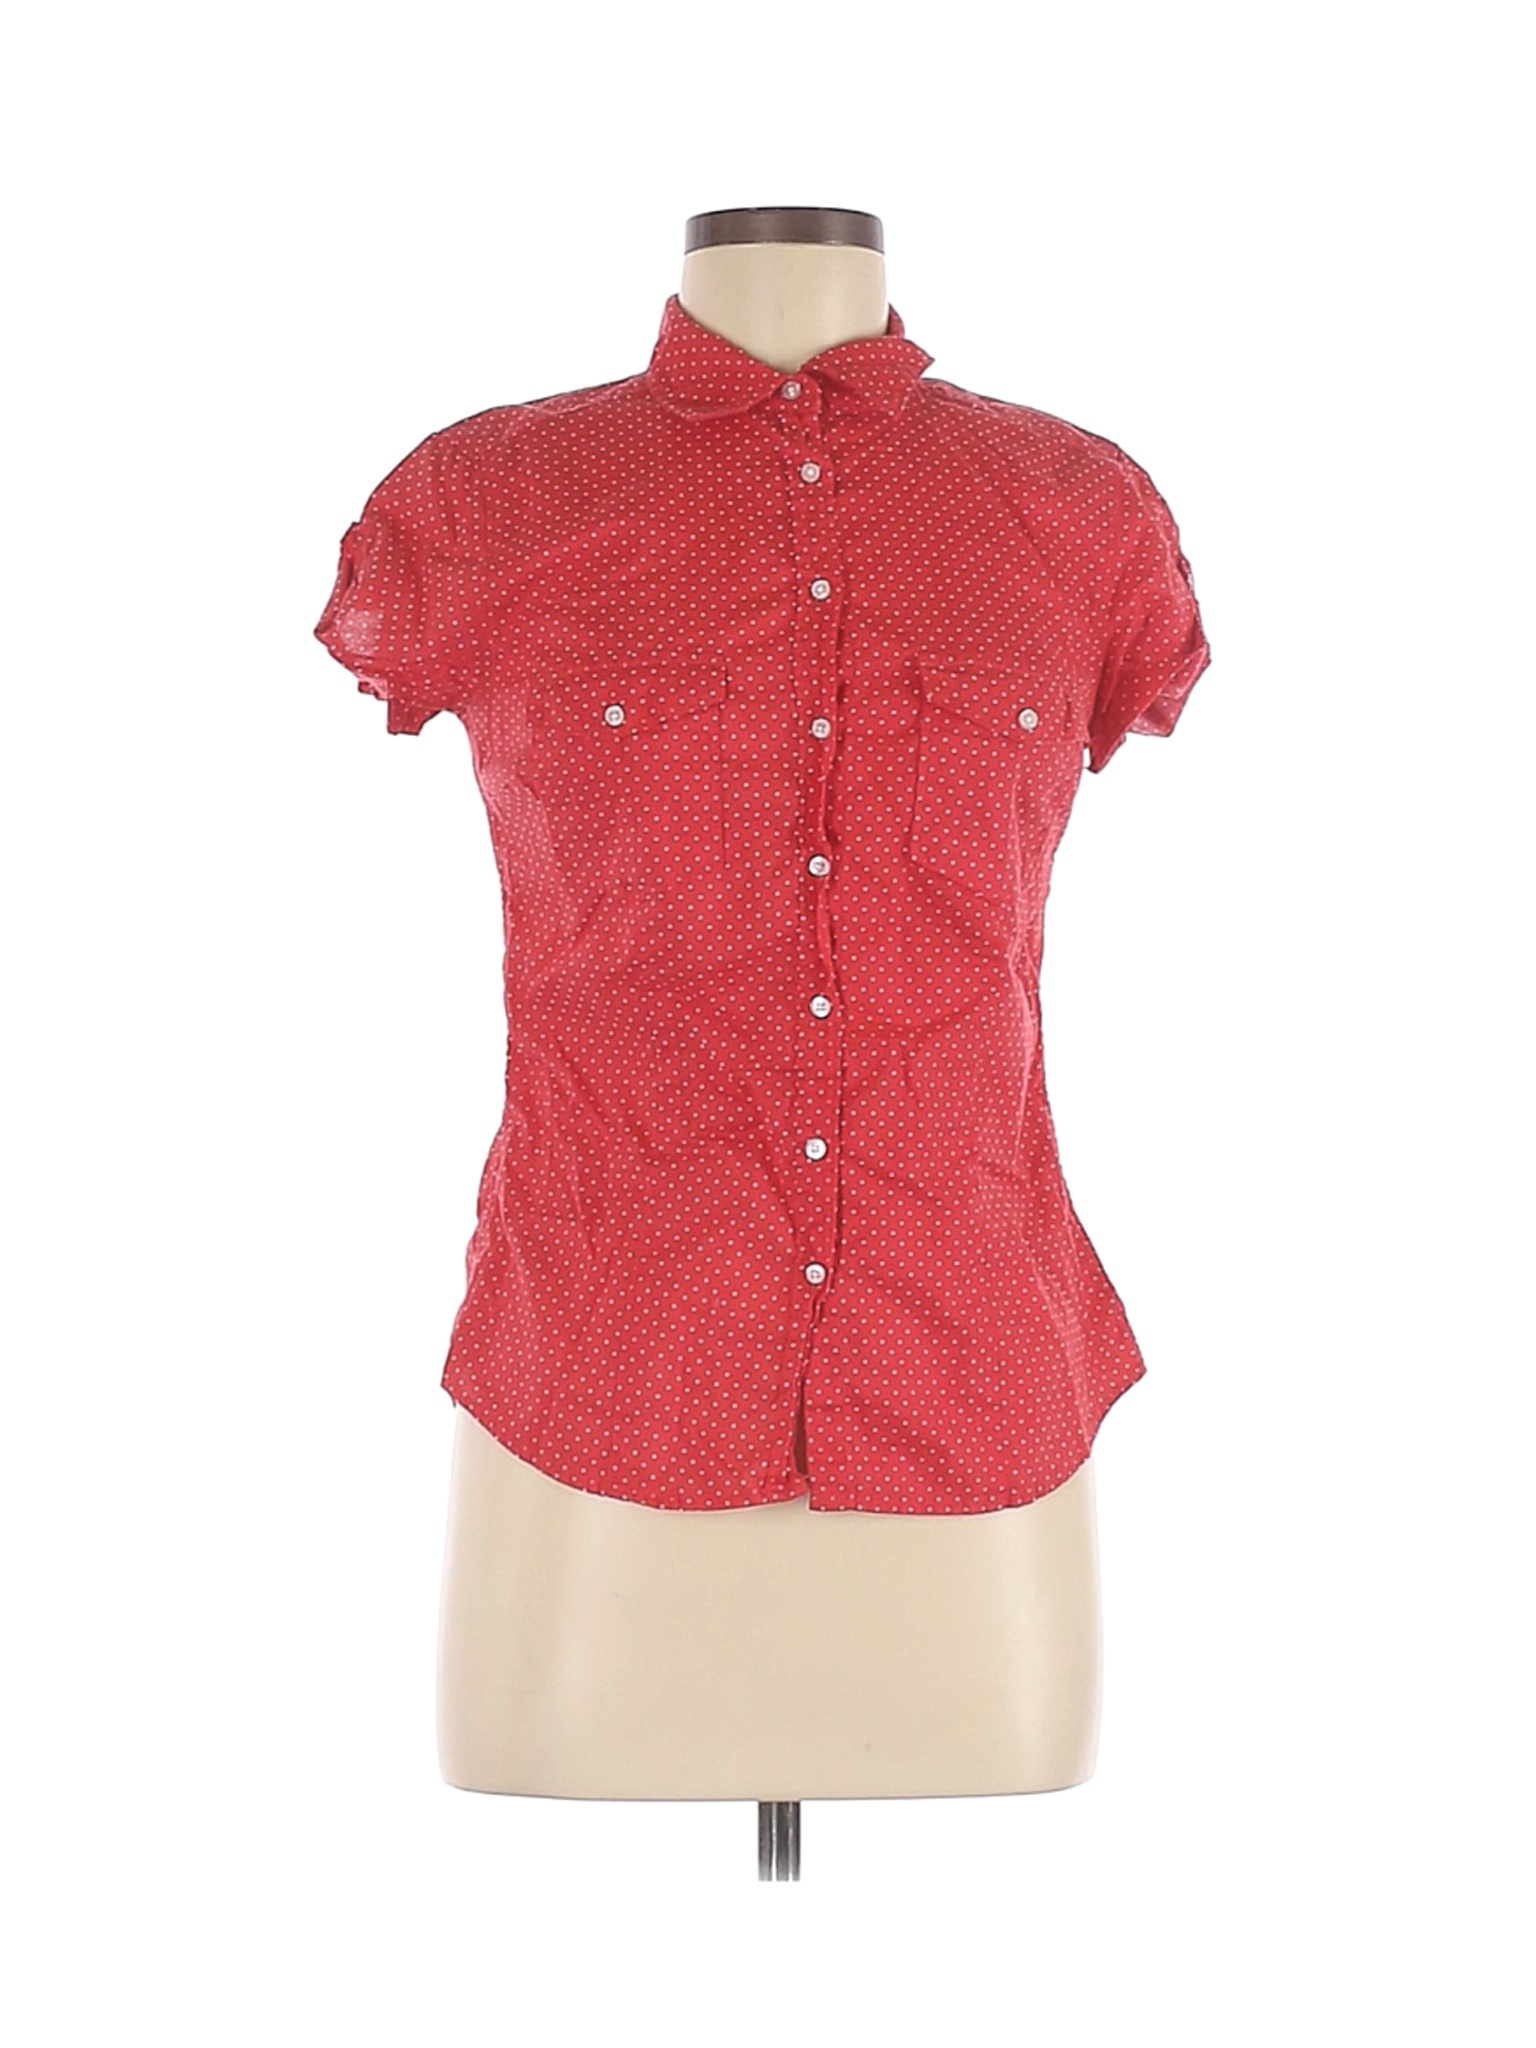 solid red button down shirt with blue buttons